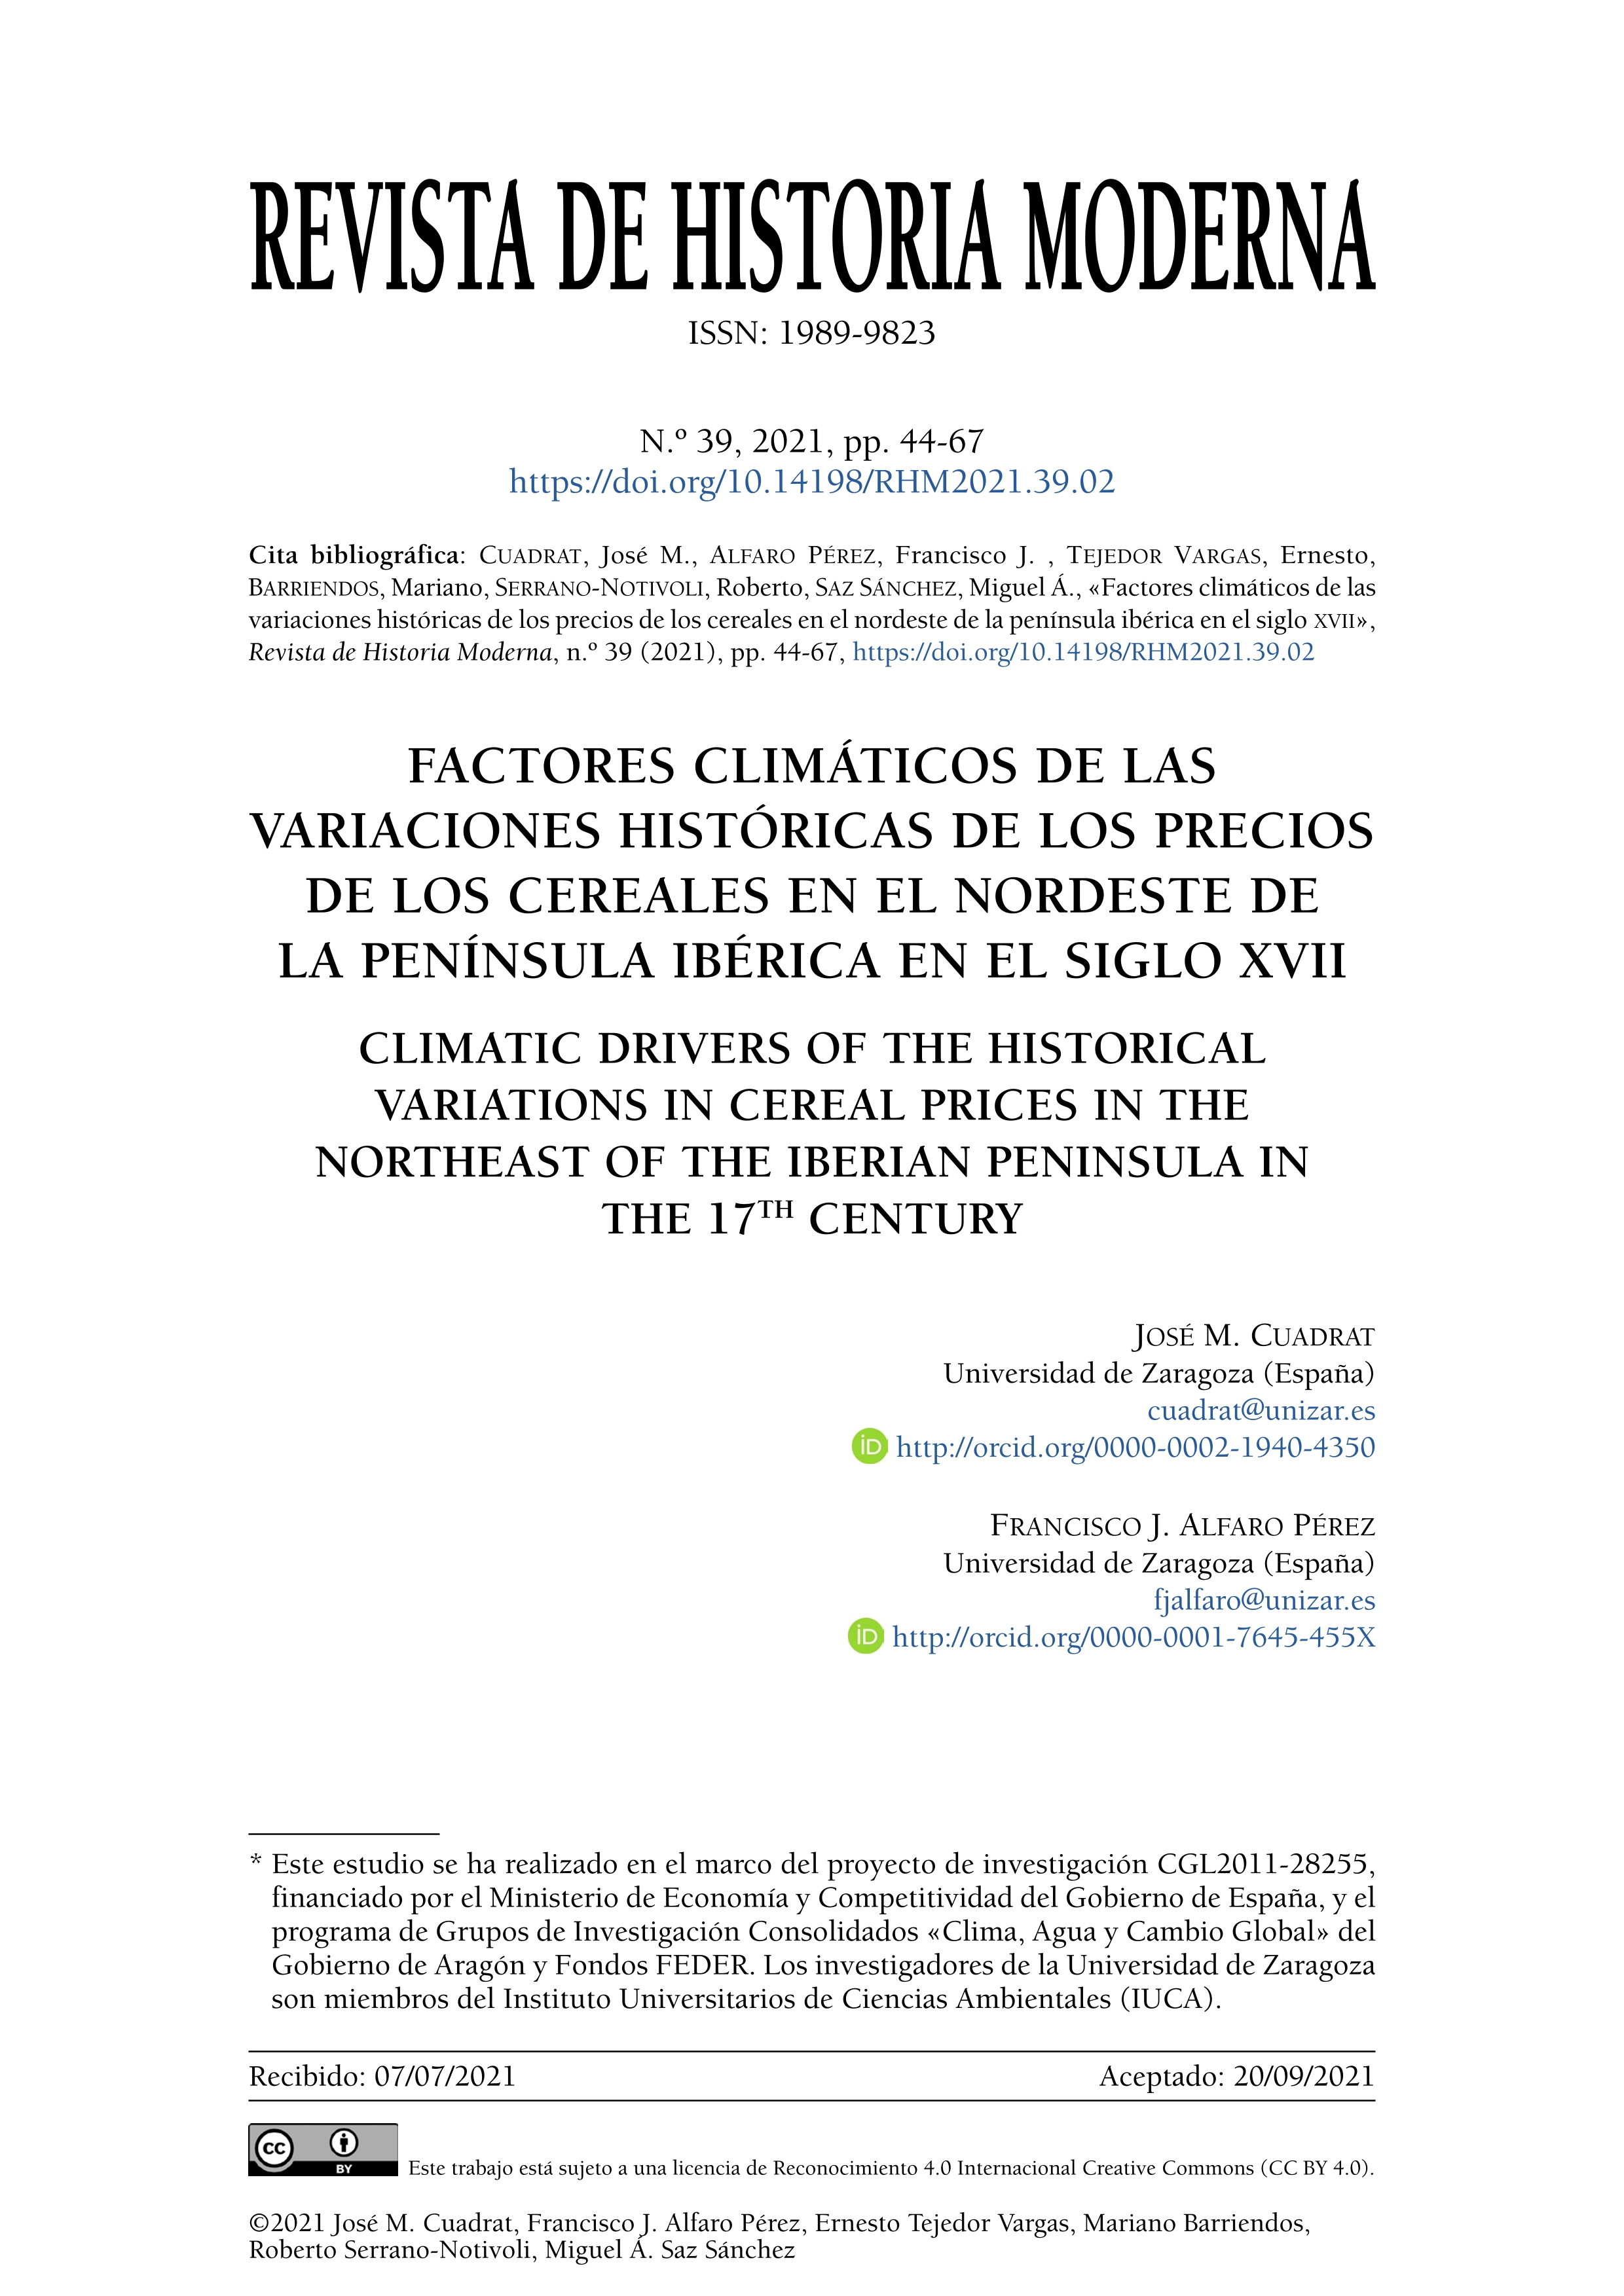 Climatic drivers of the historical variations in cereal prices in the northeast of the Iberian peninsula in the 17th century